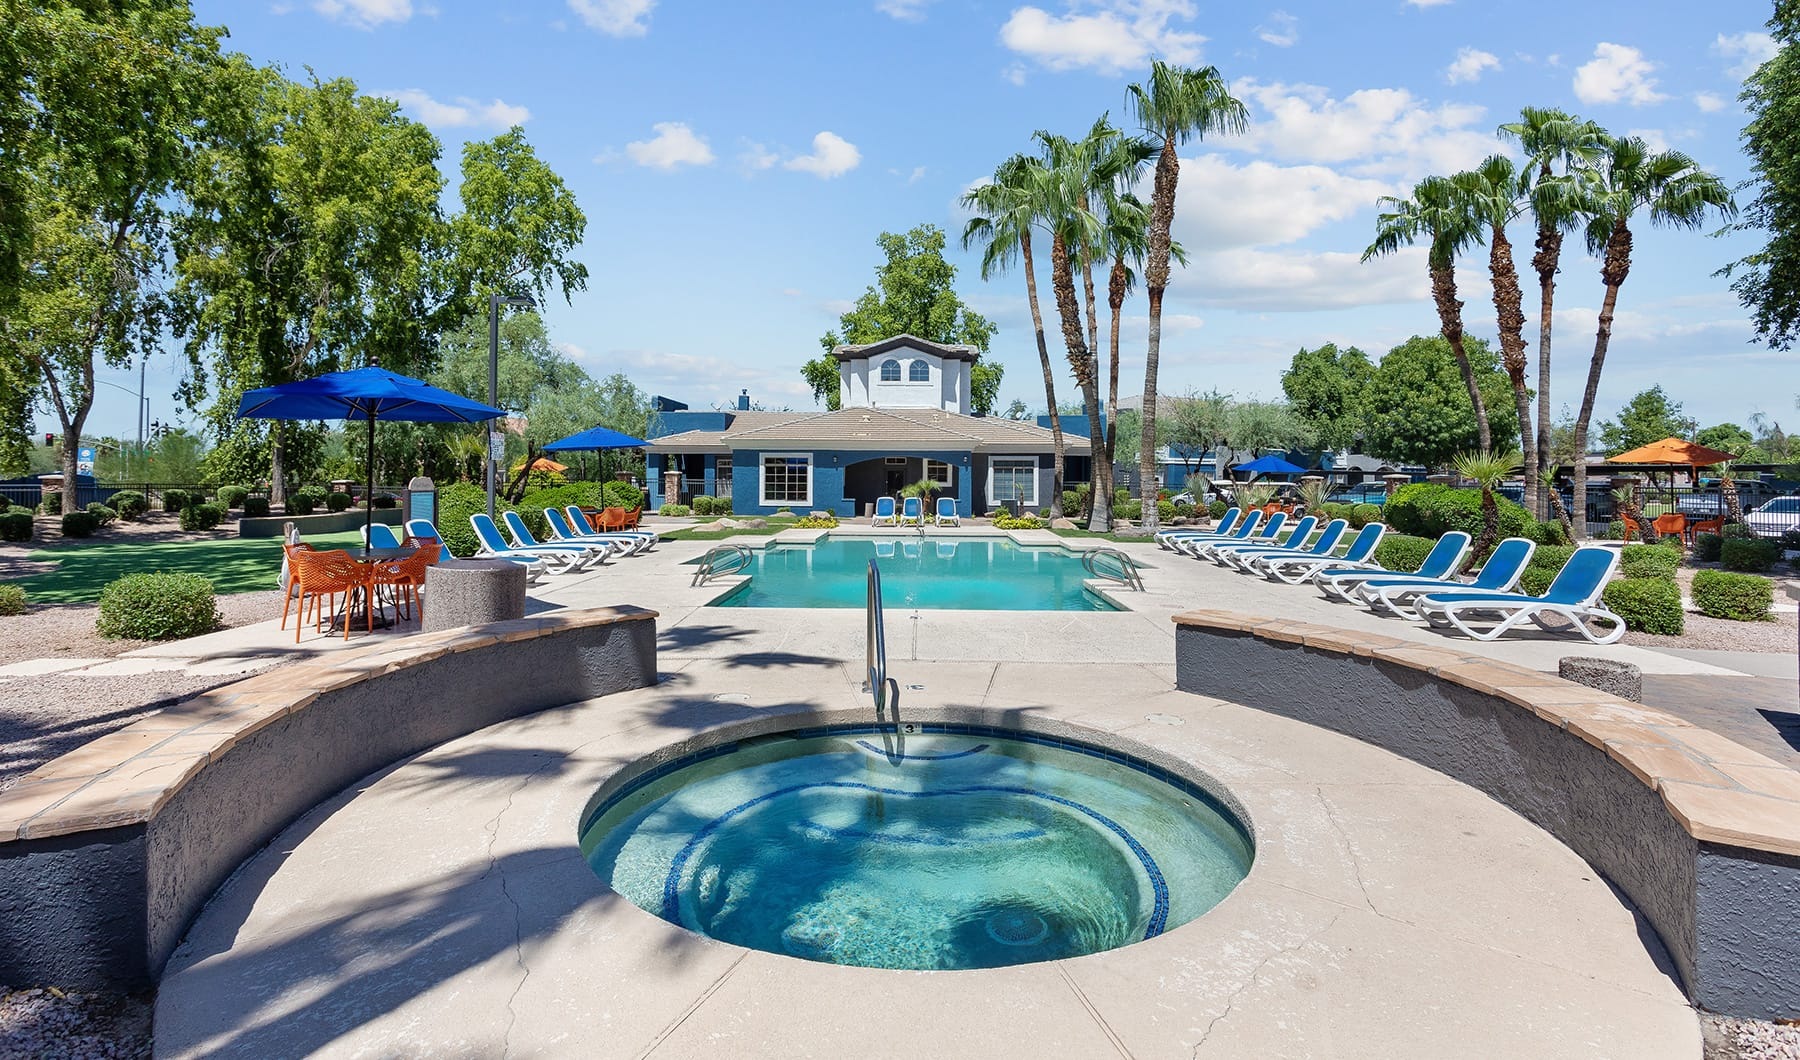 Stone Canyon jacuzzi and pool with reclining seats on pool deck